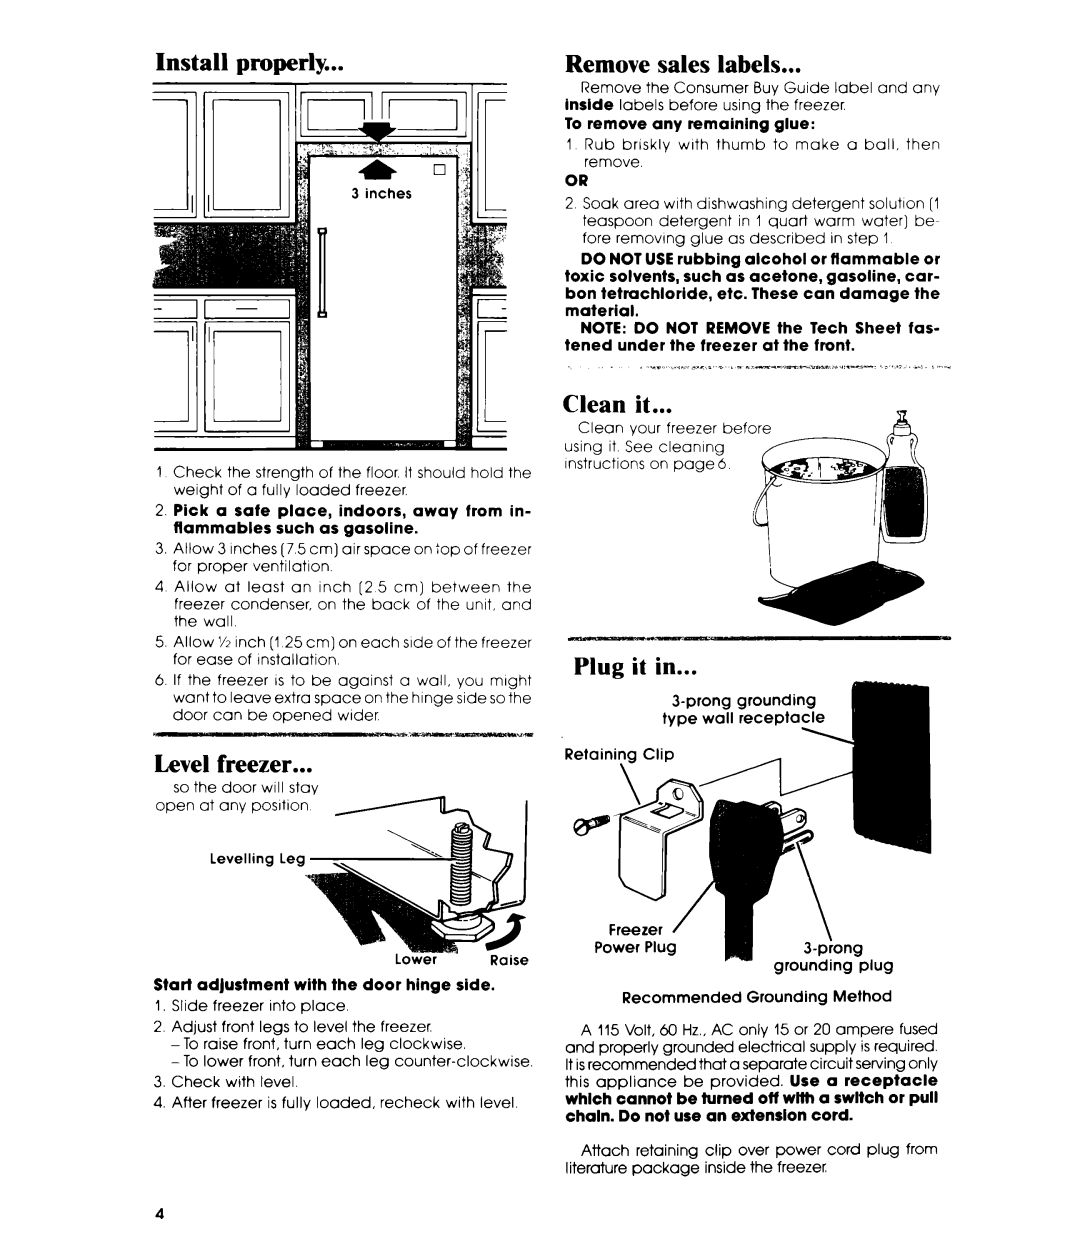 Whirlpool EV110E manual Install, properly, sales, labels, Level freezer, Clean it, Plug it in, Remove 